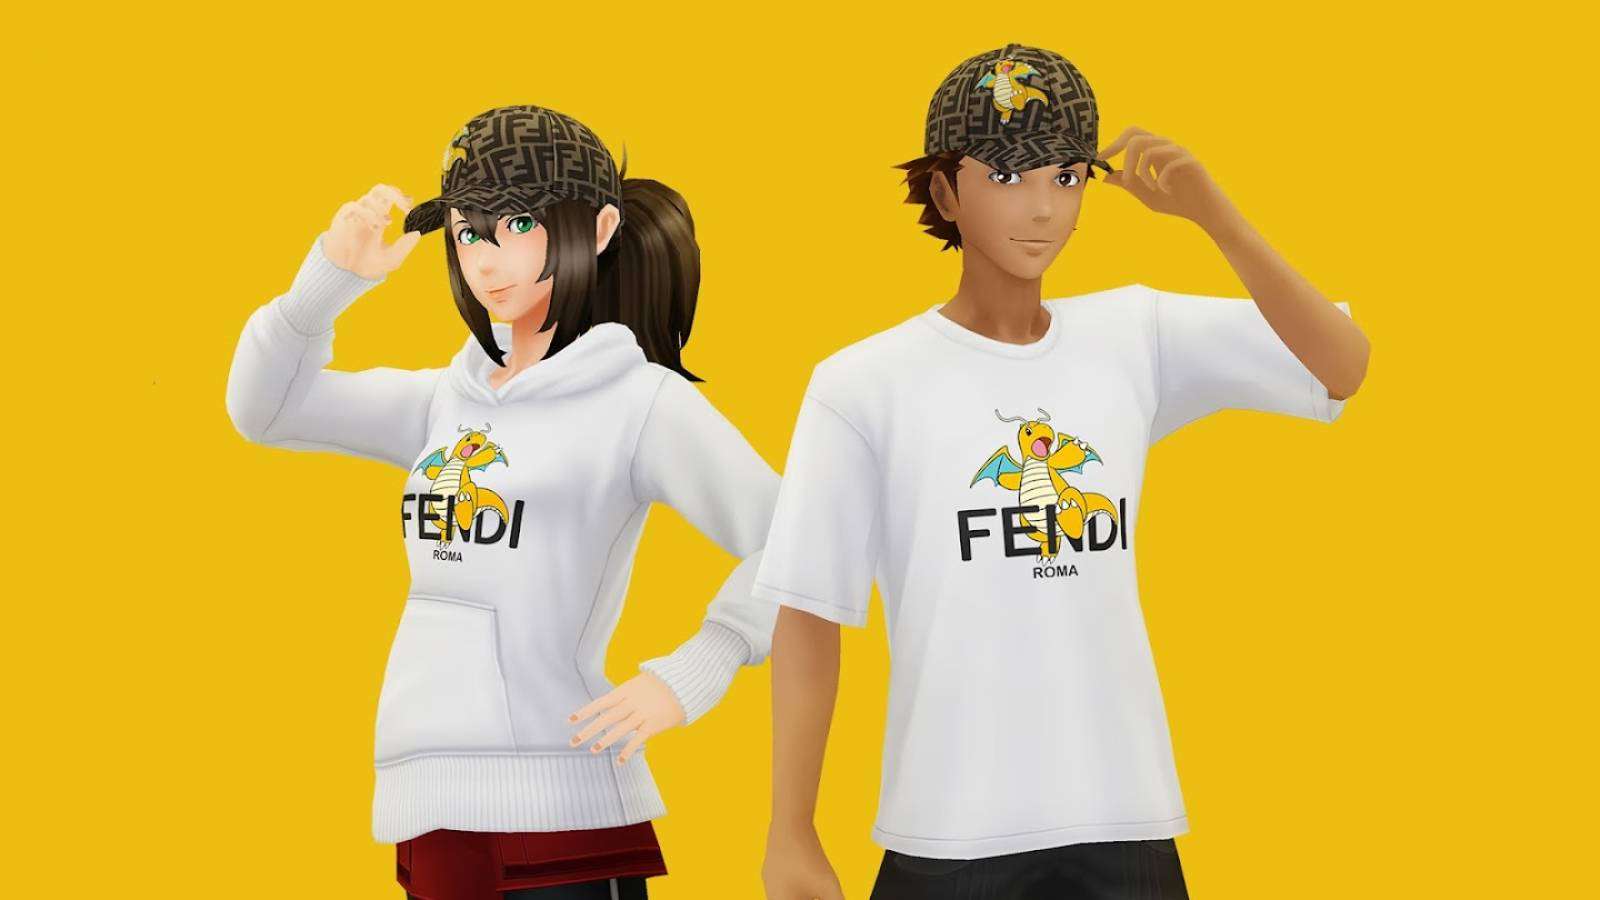 Two Pokemon Go player characters are visible, wearing the in-game Pokemon Go x Fendi x Frgmt avatar items